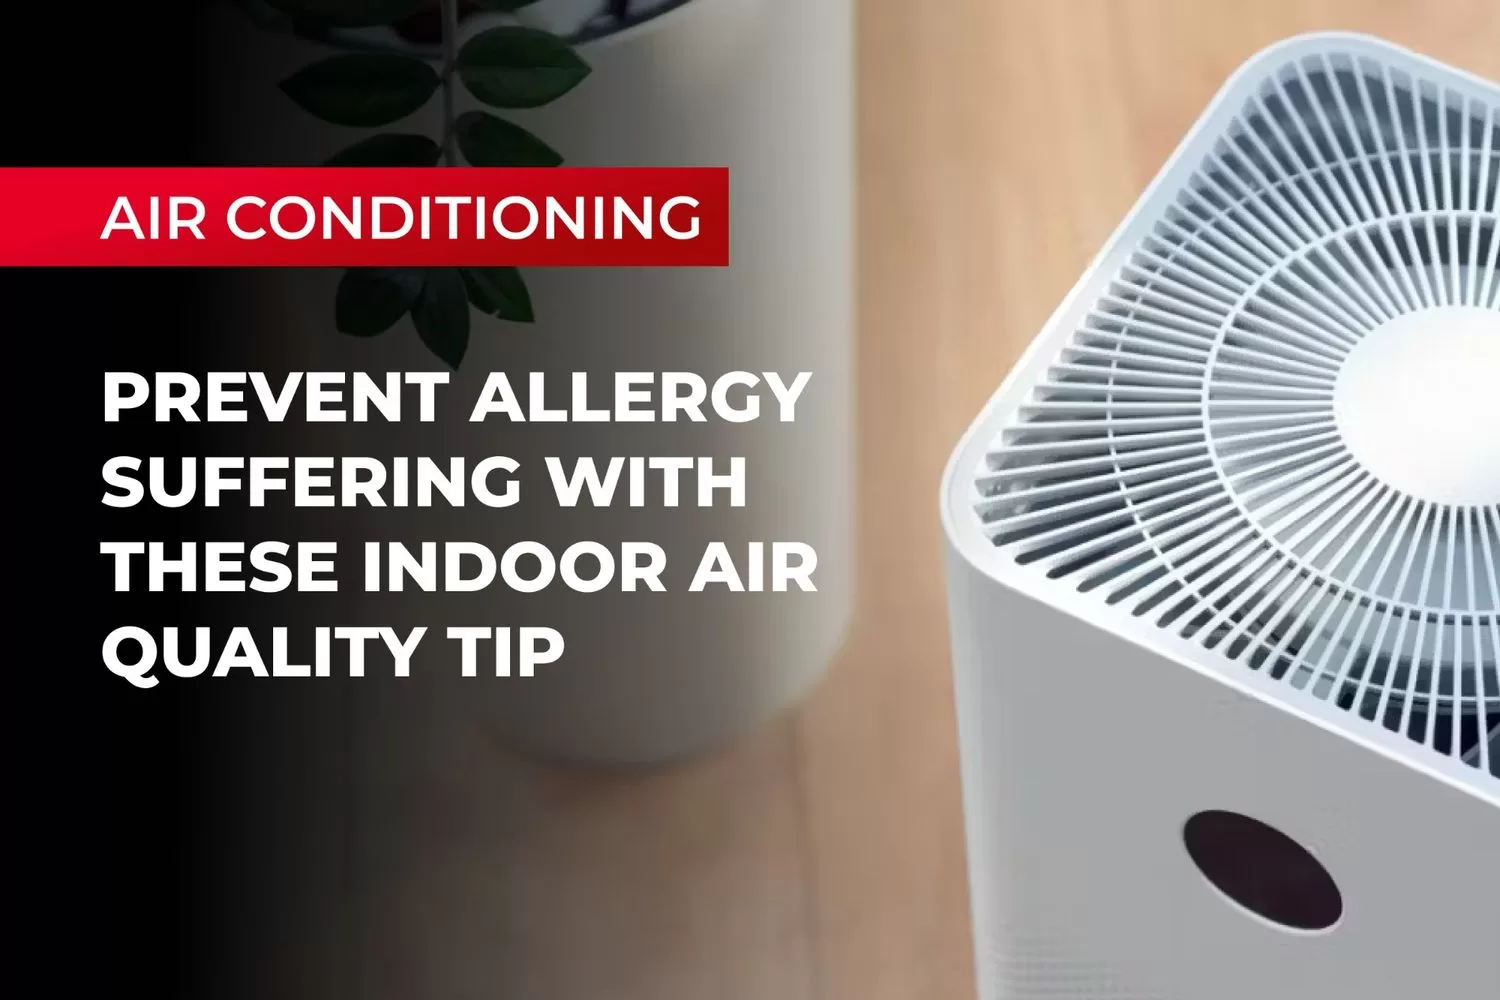 Prevent Allergy Suffering with These Indoor Air Quality Tips